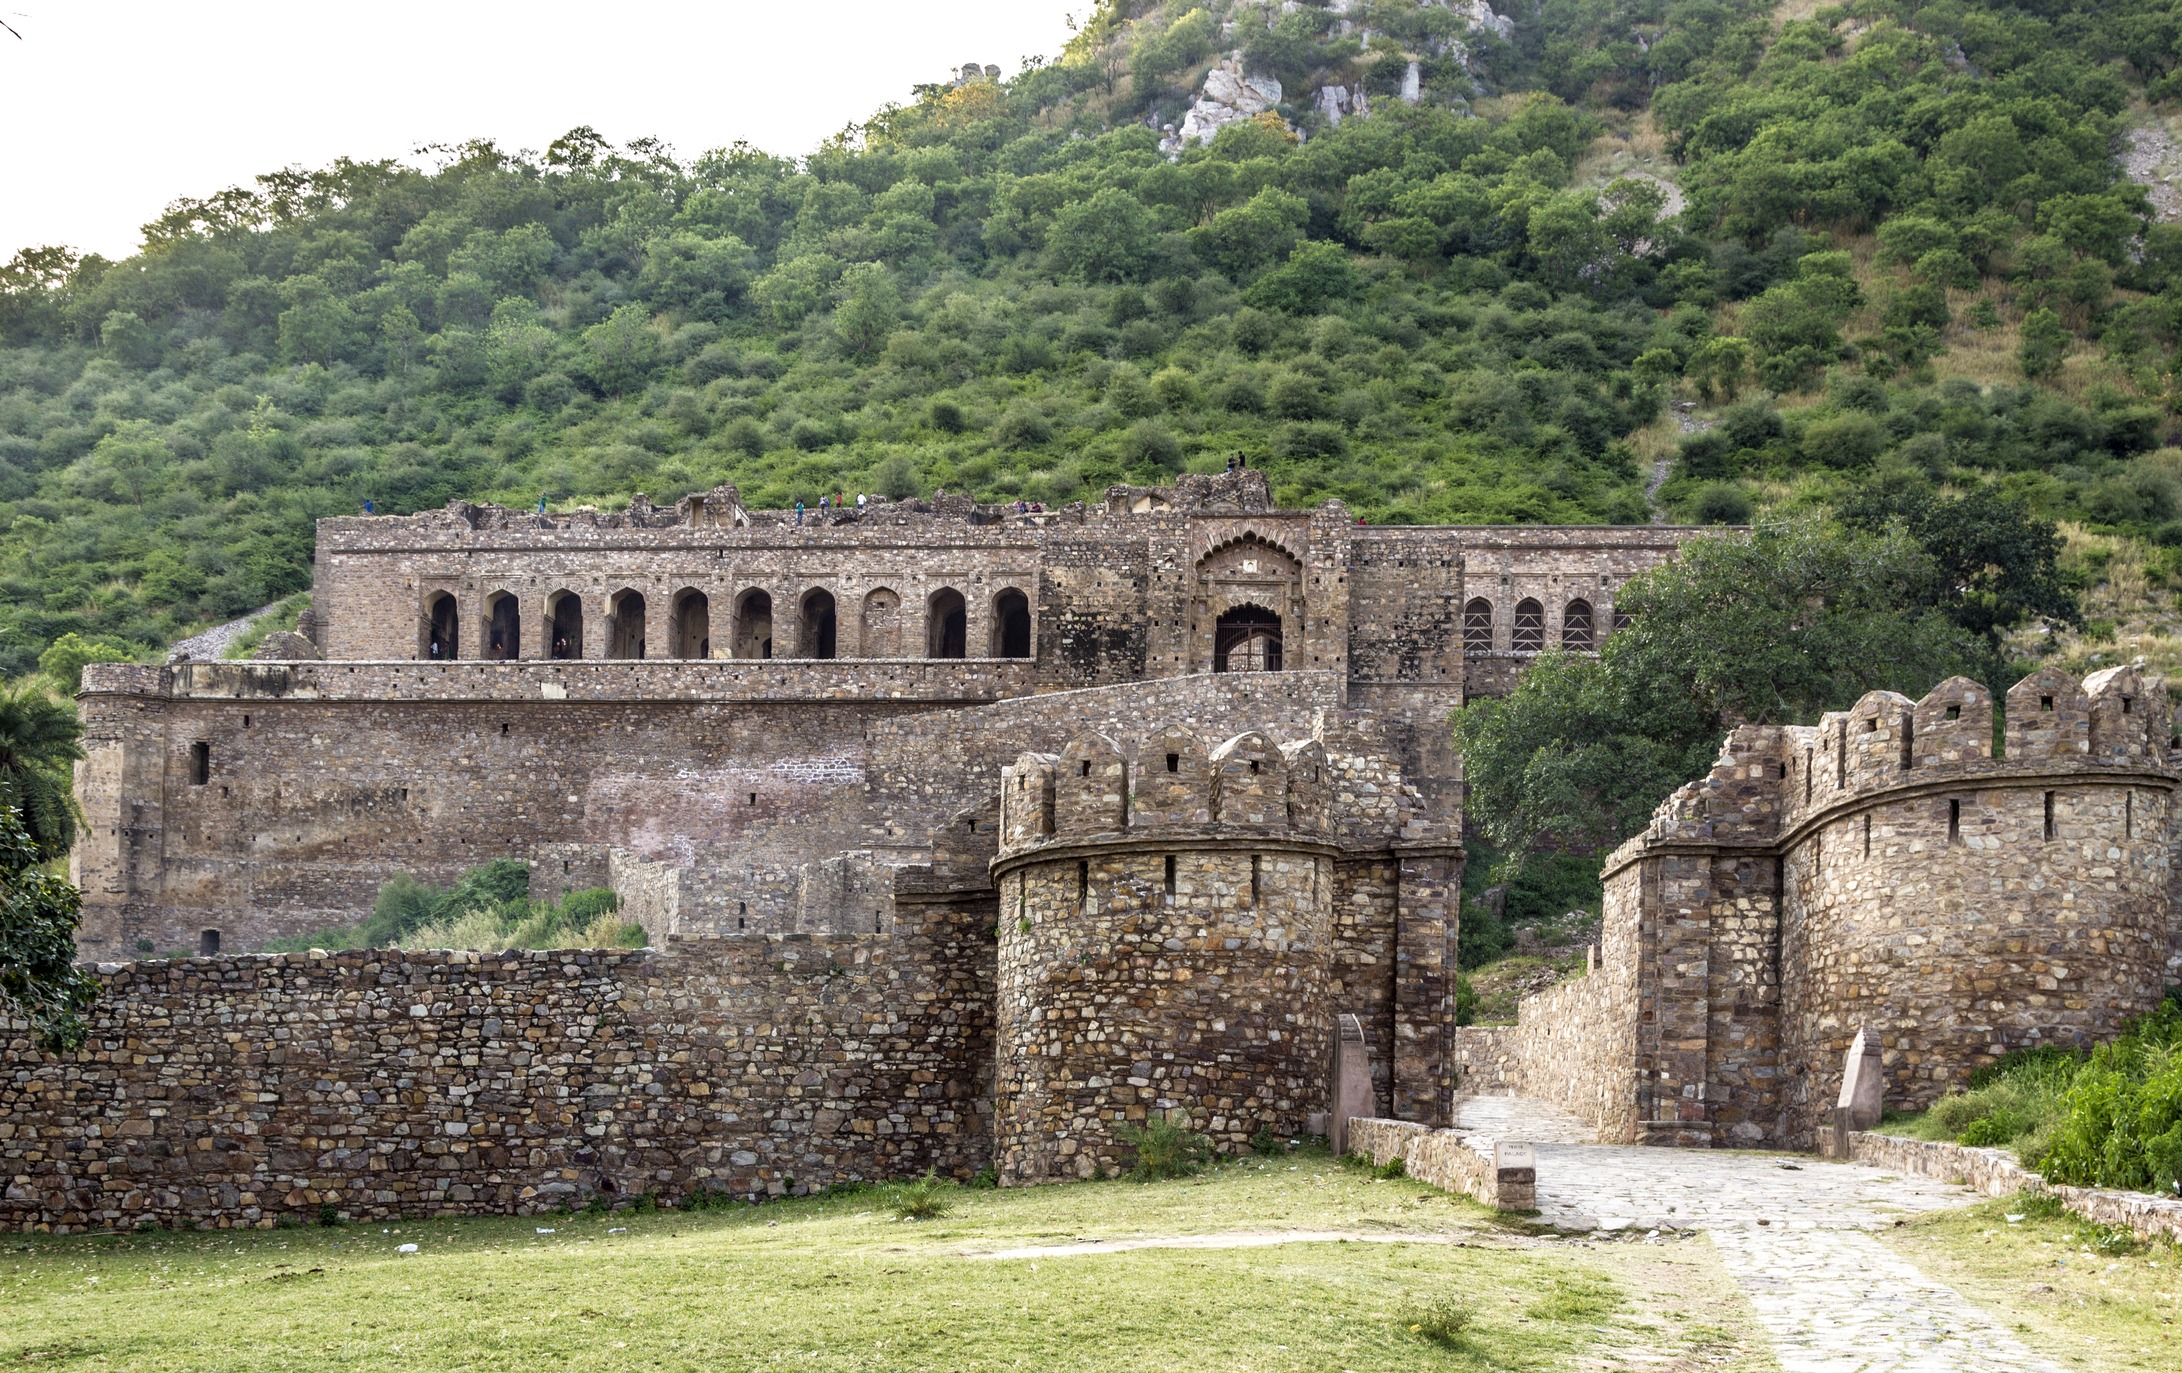 the old Bhangarh Fort in India